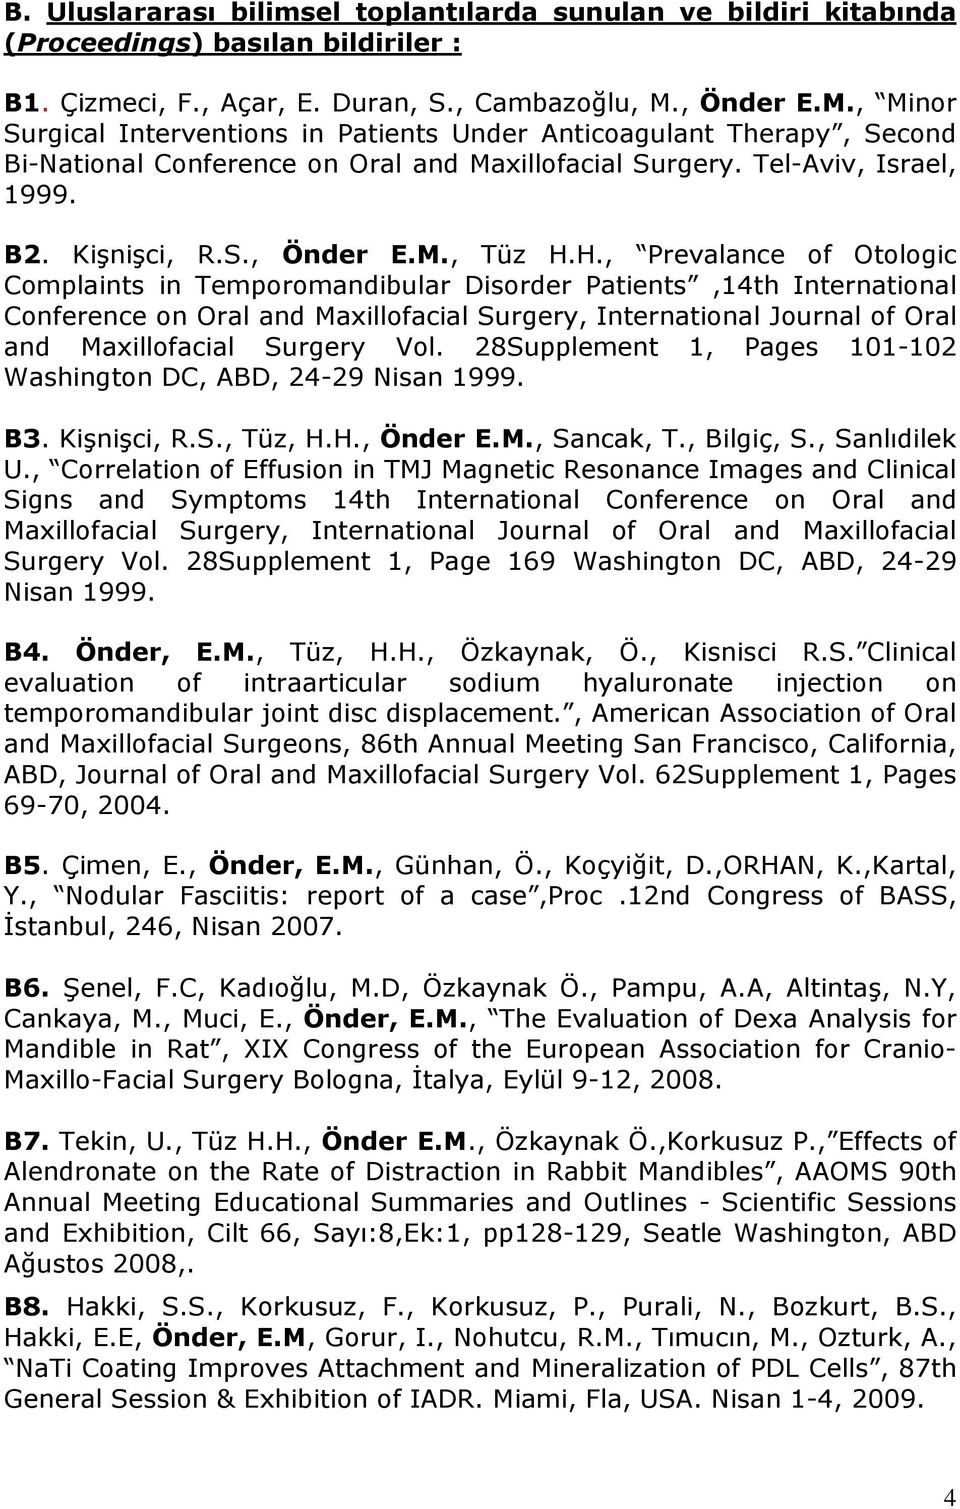 H., Prevalance of Otologic Complaints in Temporomandibular Disorder Patients,14th International Conference on Oral and Maxillofacial Surgery, International Journal of Oral and Maxillofacial Surgery